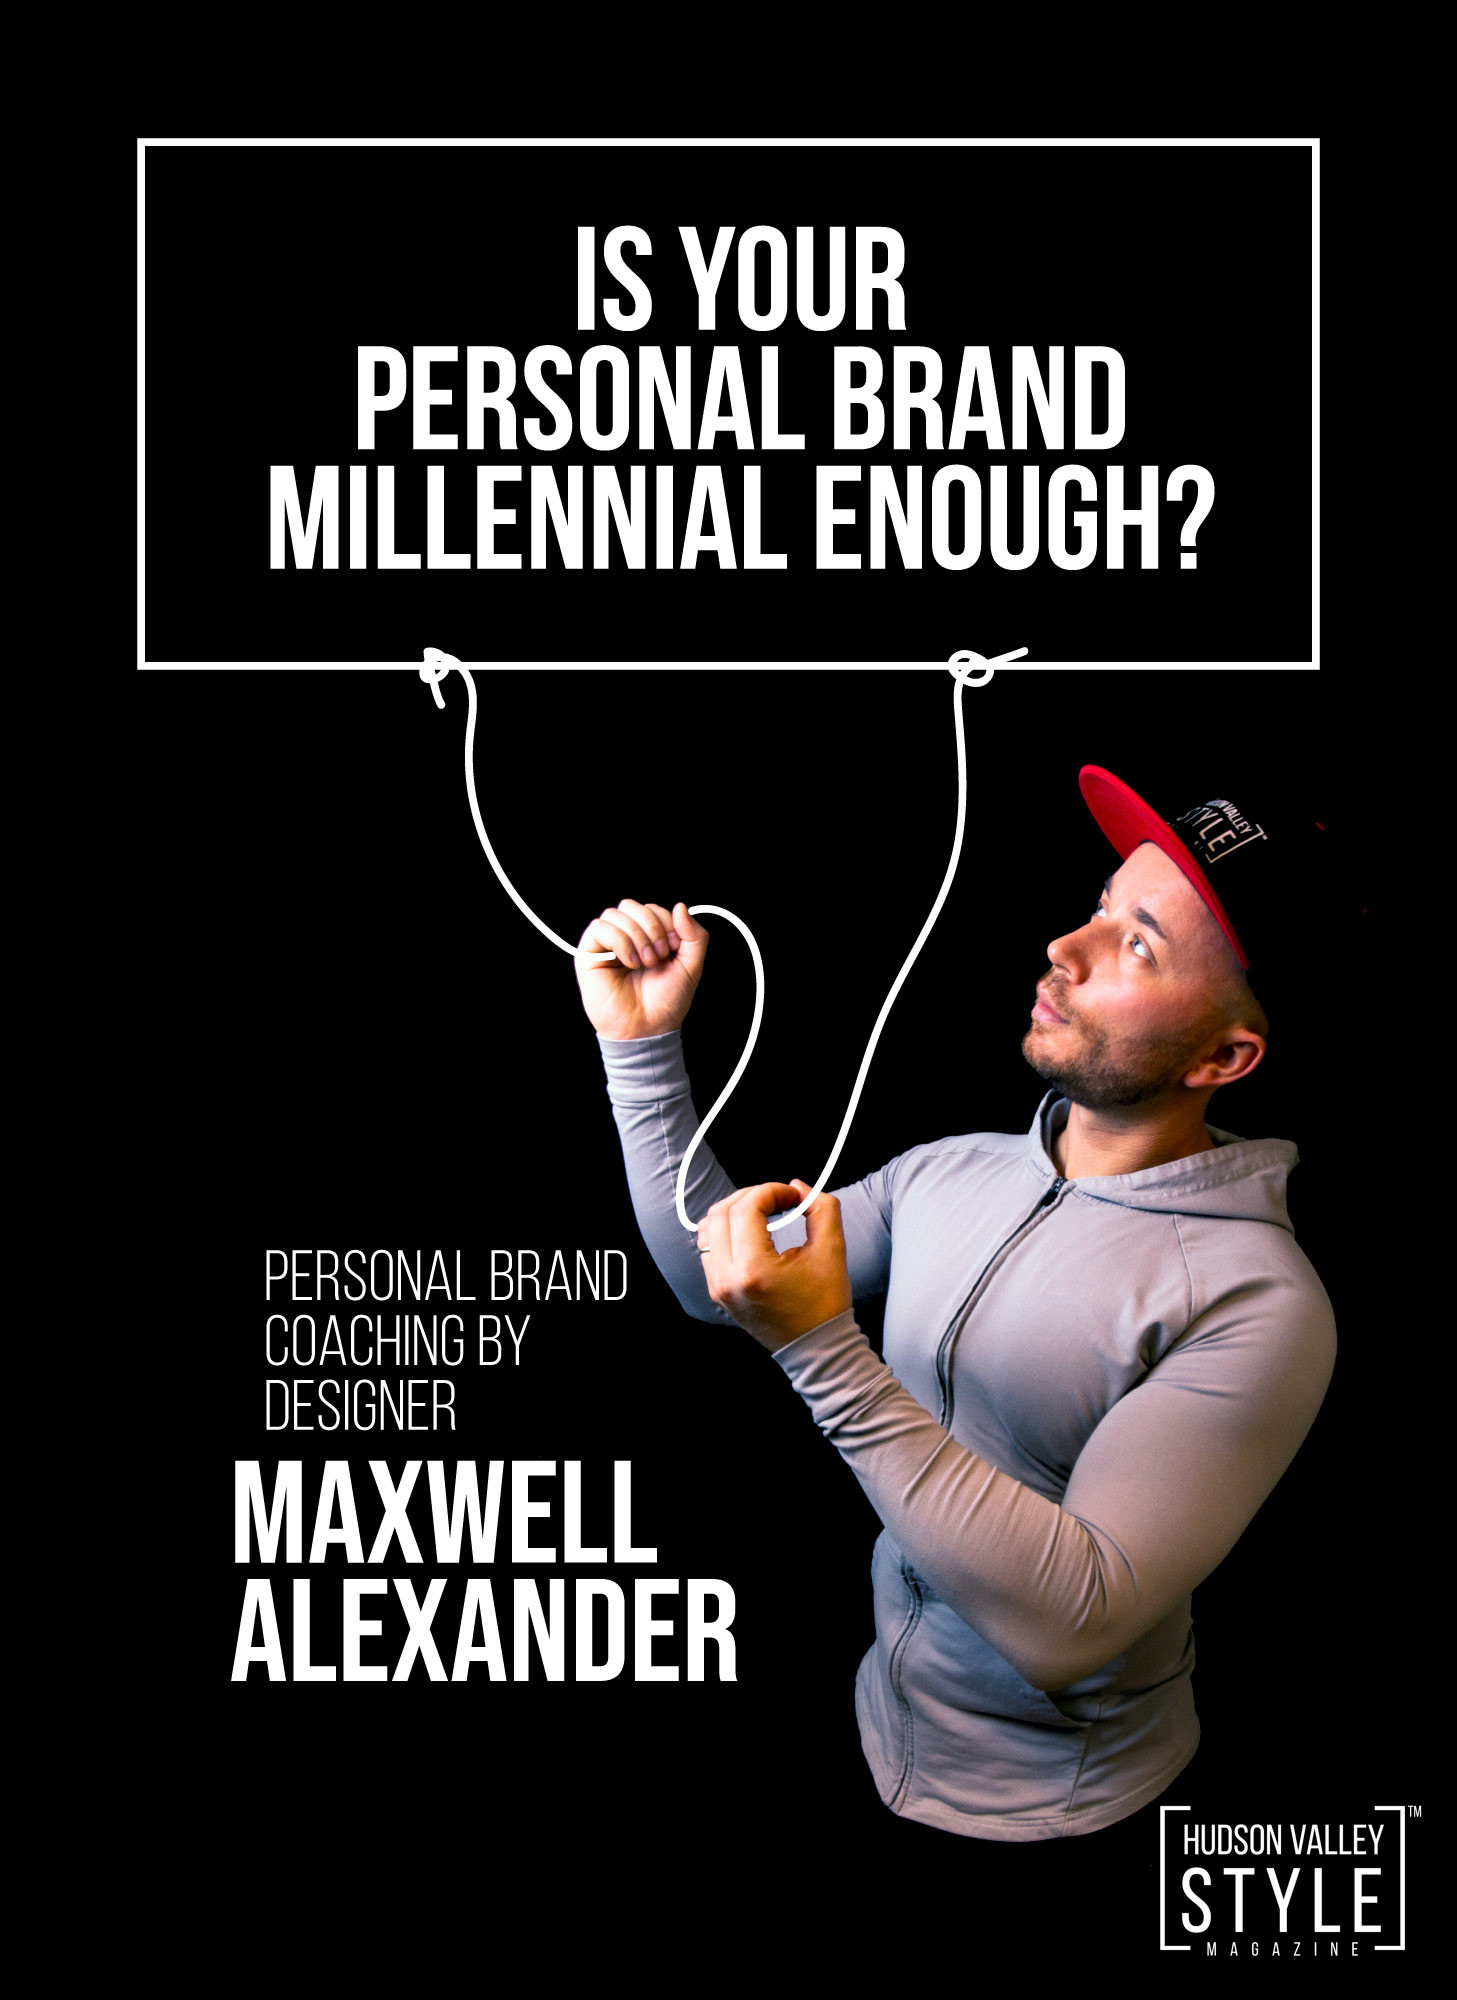 Is Your Personal Brand Millennial Enough? - Personal Branding Coaching by Designer Maxwell Alexander